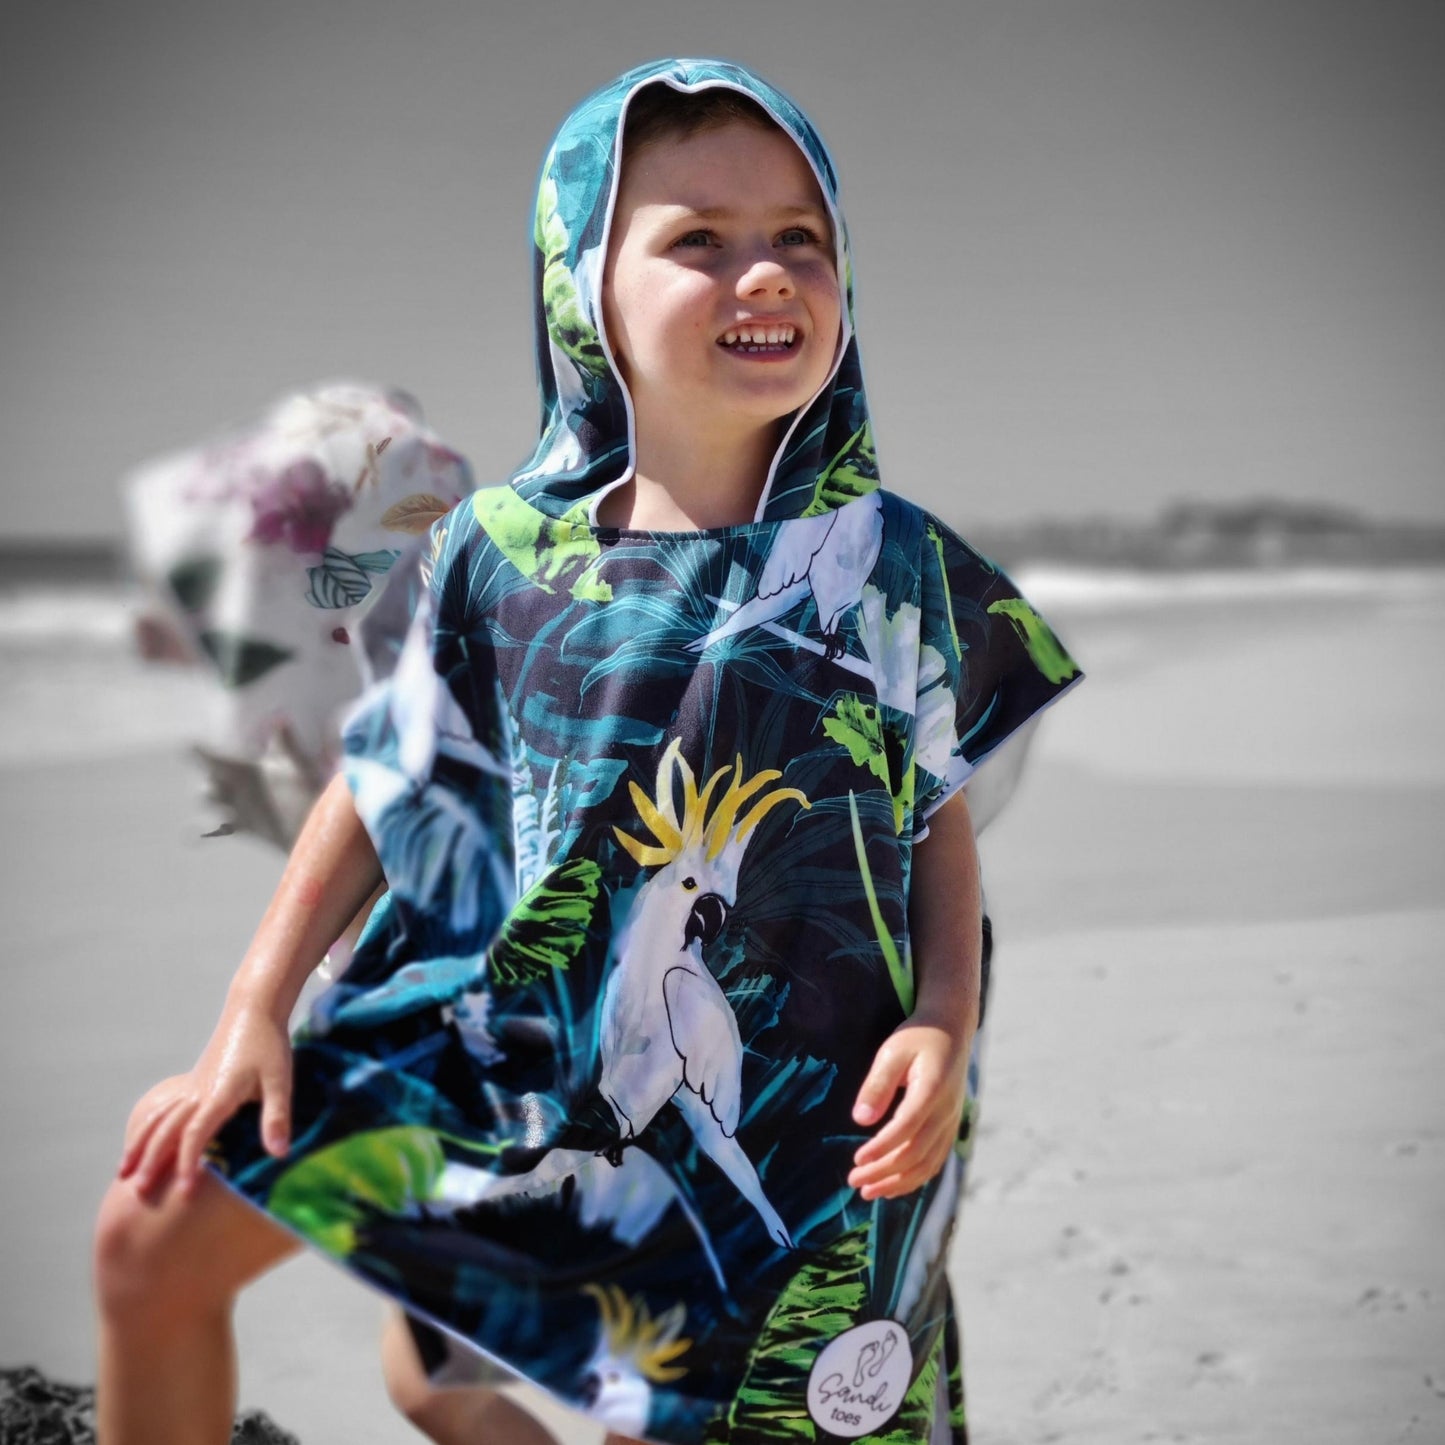 Boy (ages 6-12) wearing a blue hooded beach hoodie with a Bird of Paradise design featuring a yellow crested white cockatoo and palm leaves. He is standing at Currumbin Beach, Queensland, with one foot placed on a rock and the other in the shallow water. He has a relaxed and smile expression on his face.